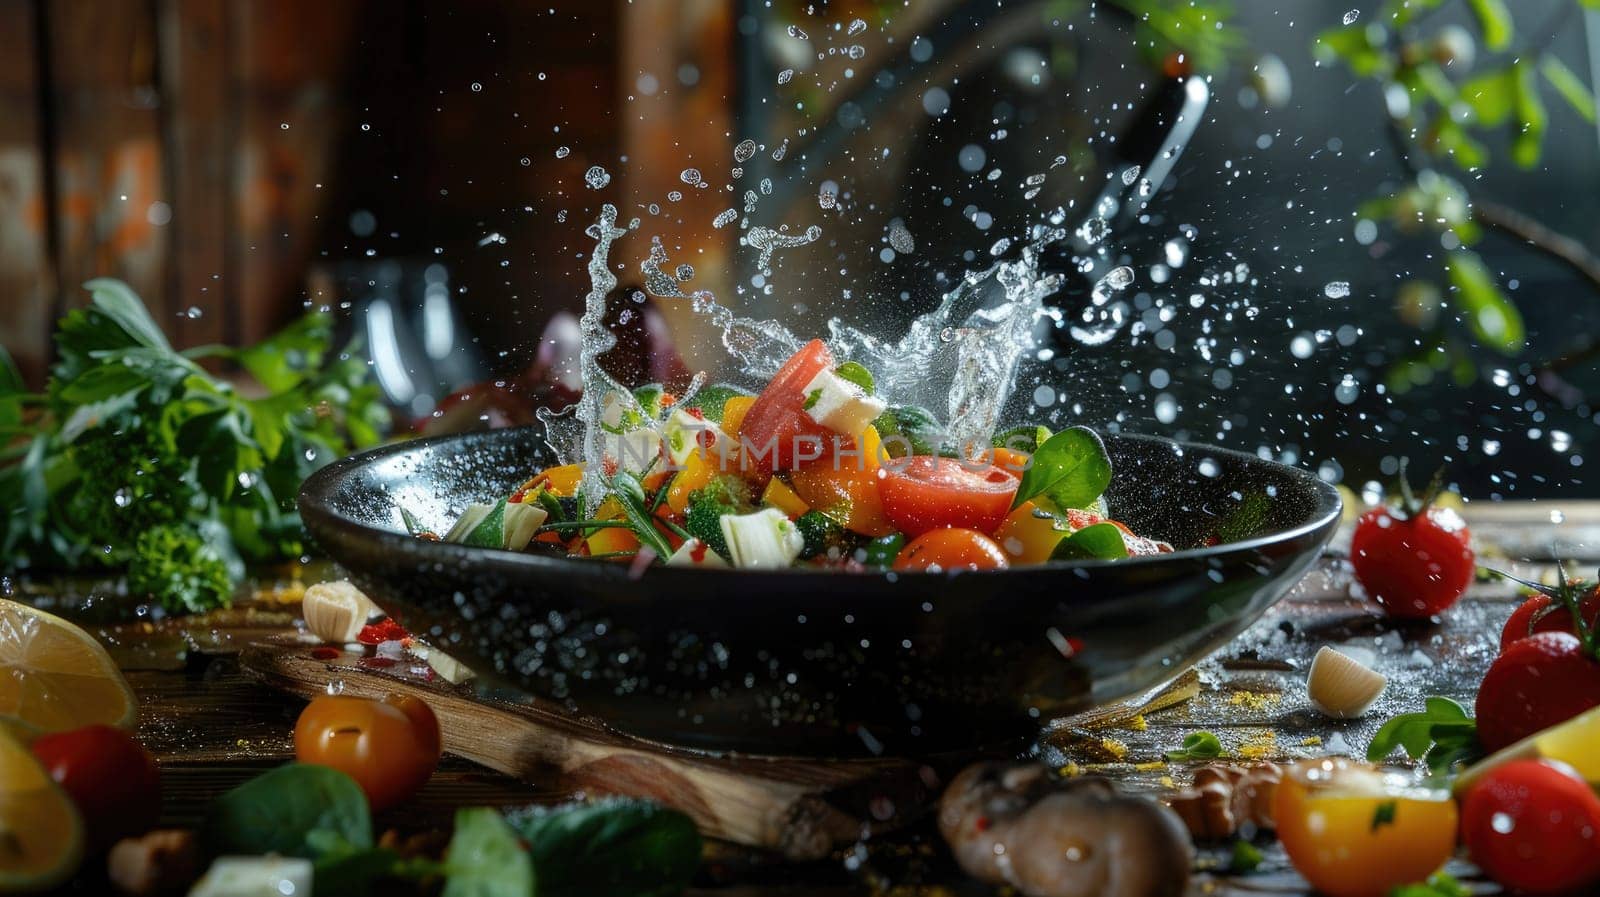 A bowl of salad with a lot of water splashing out of it.